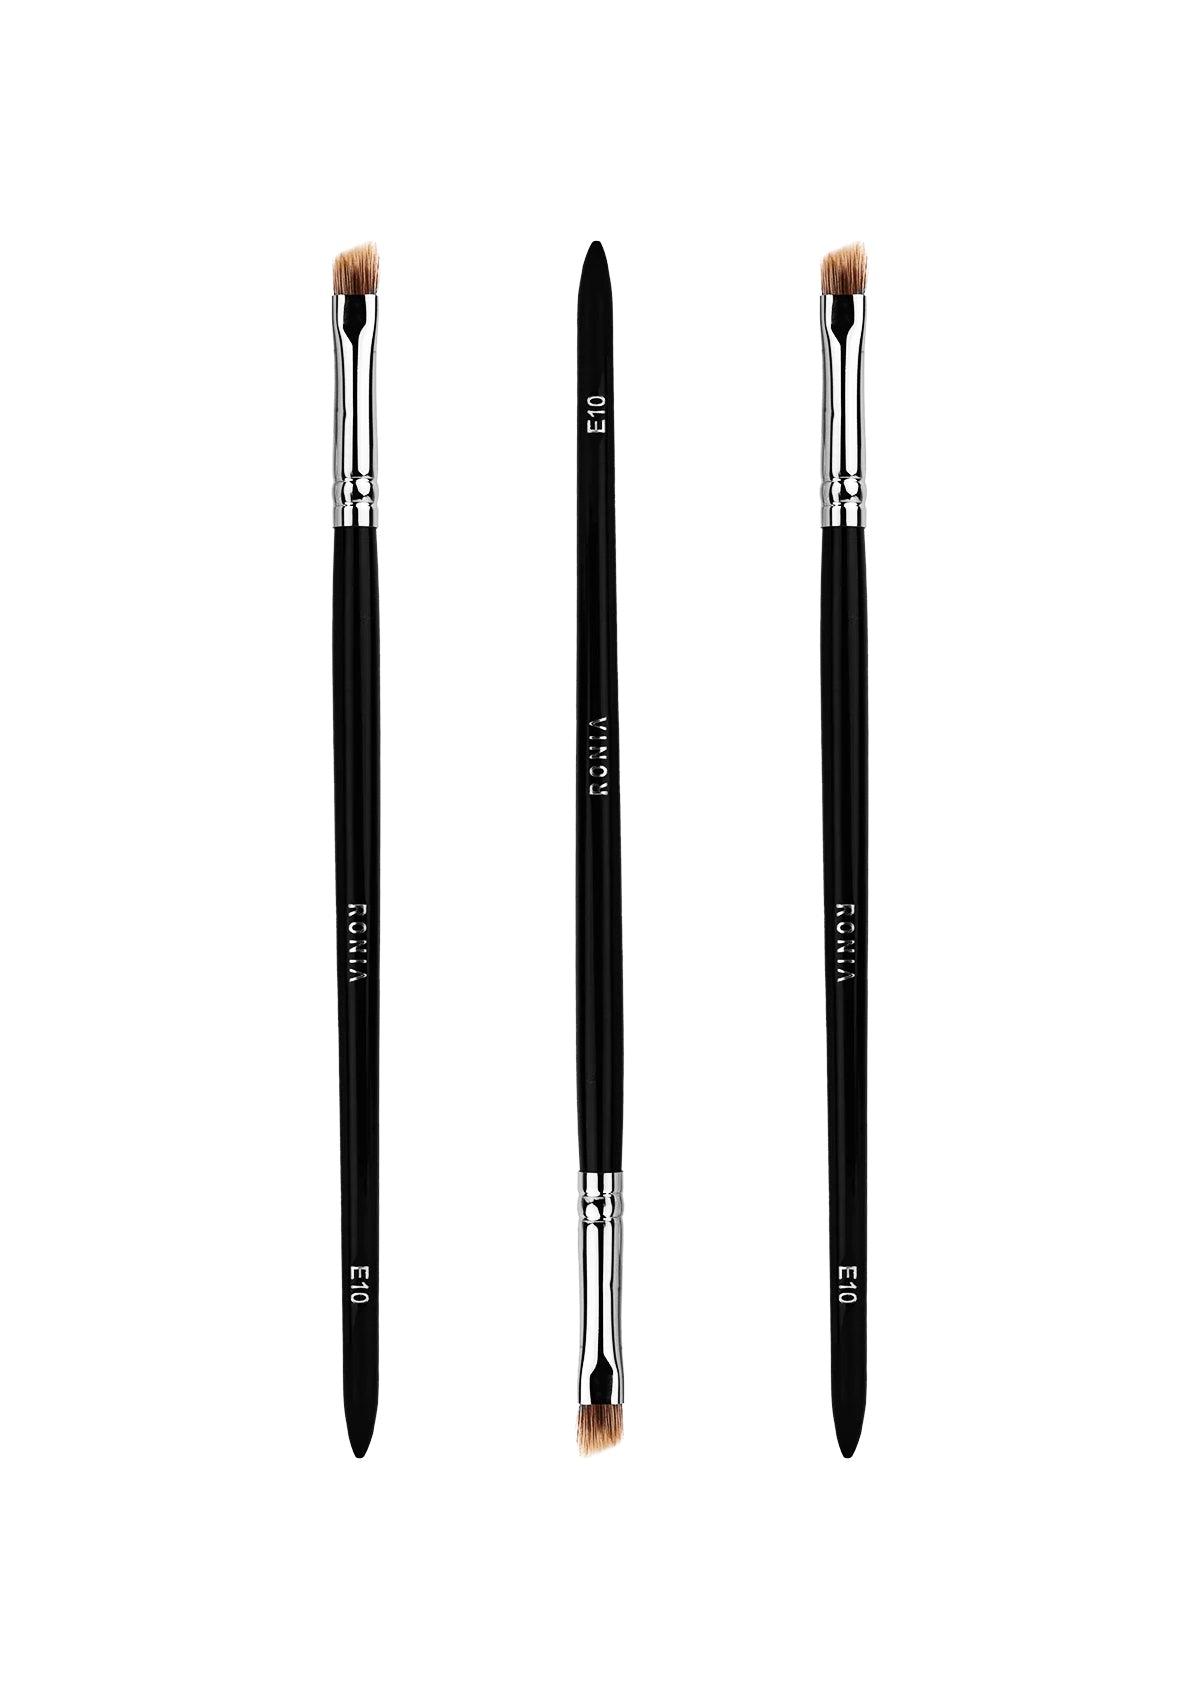 E10: Angled Brush for Brows